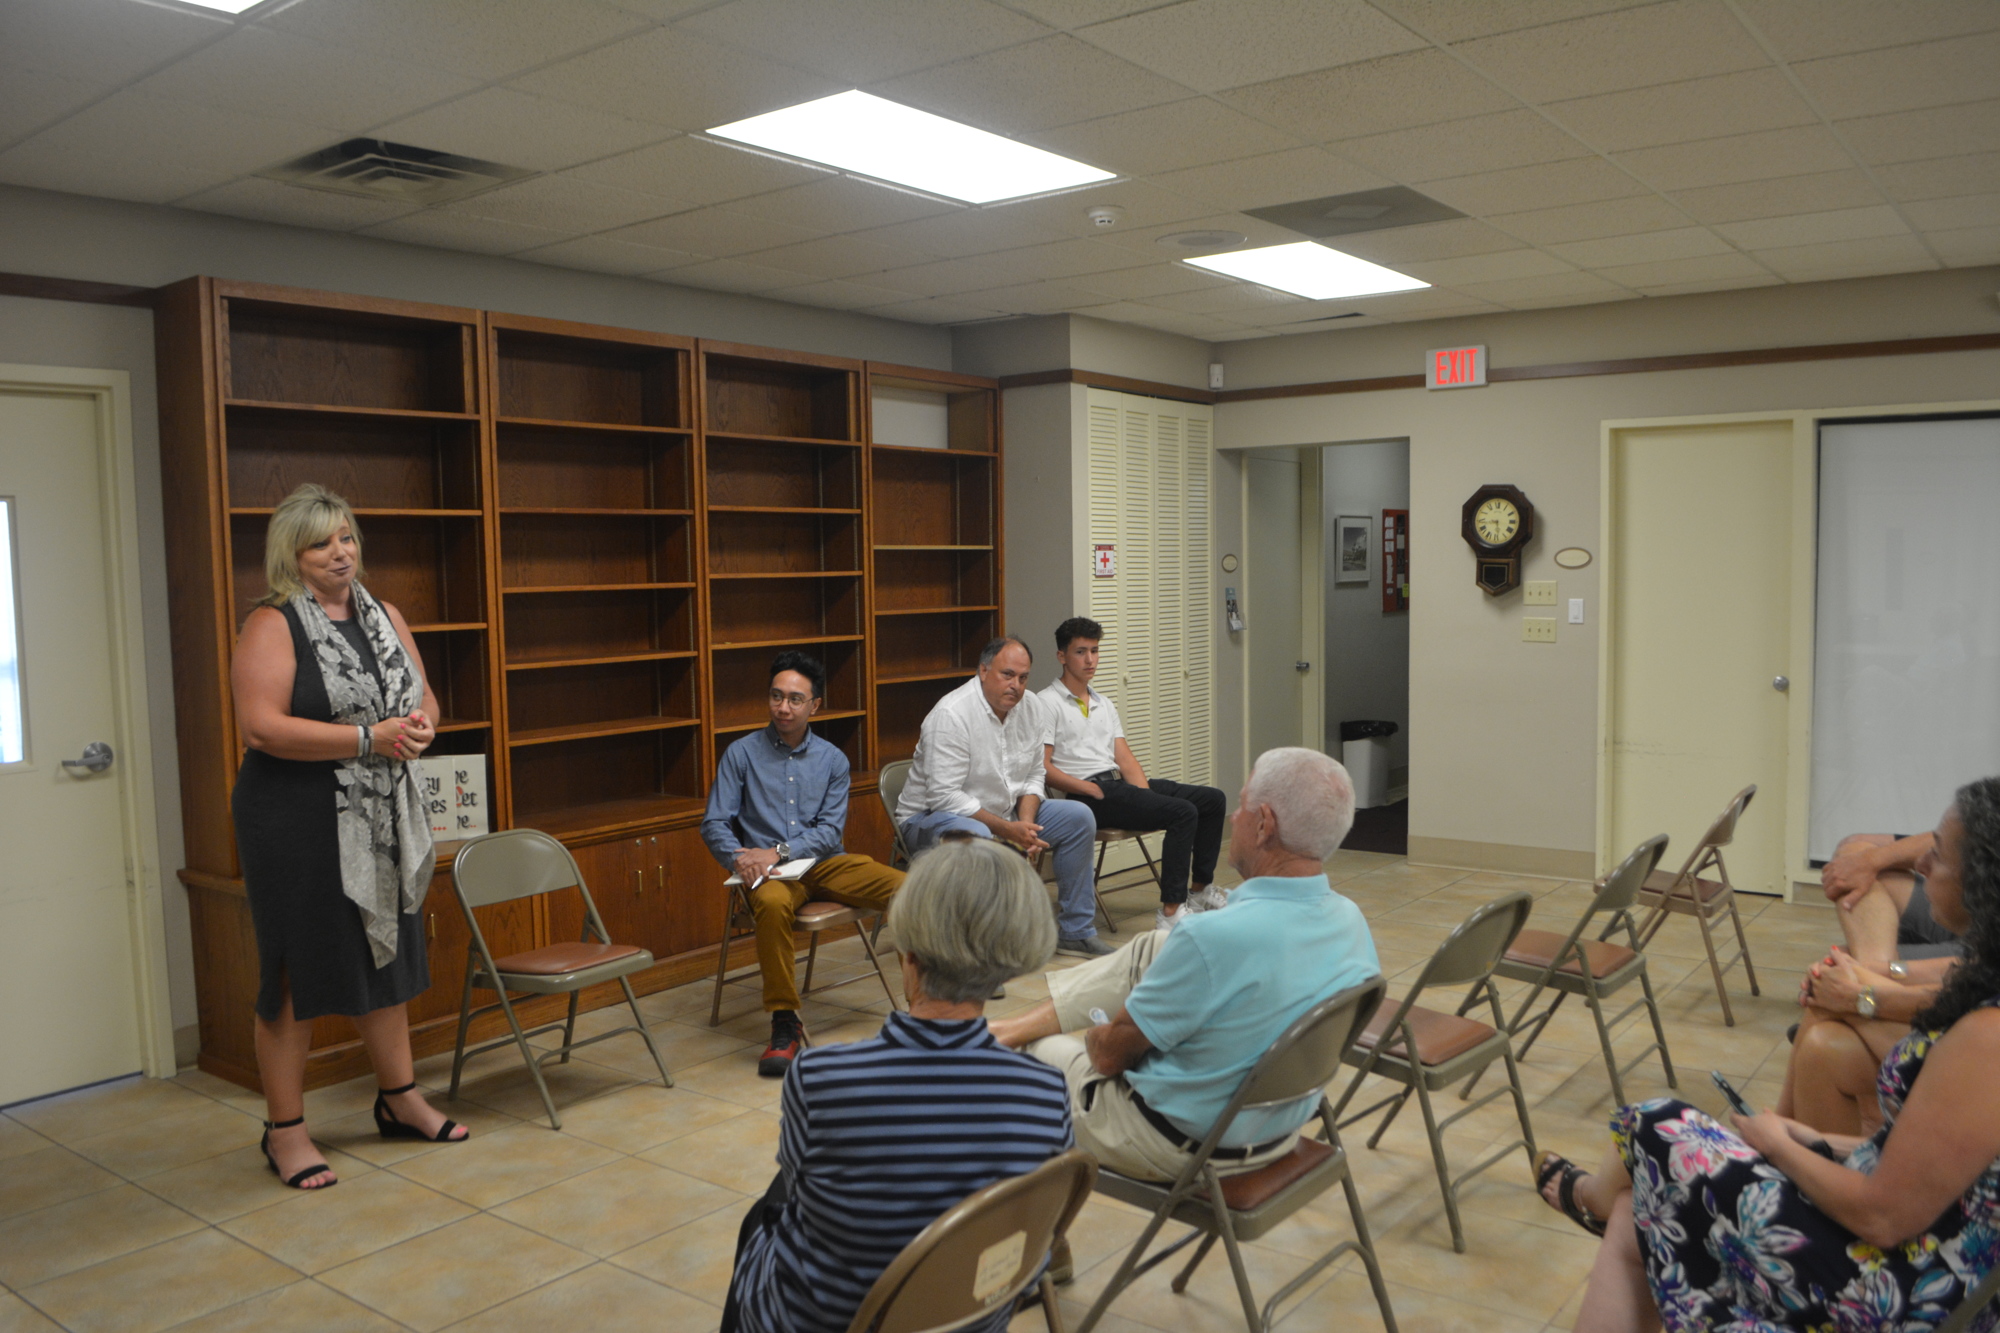 Jen Horvat discusses a proposal to place a carousel at St. Armands Circle Park during a community meeting on Tuesday, June 9.